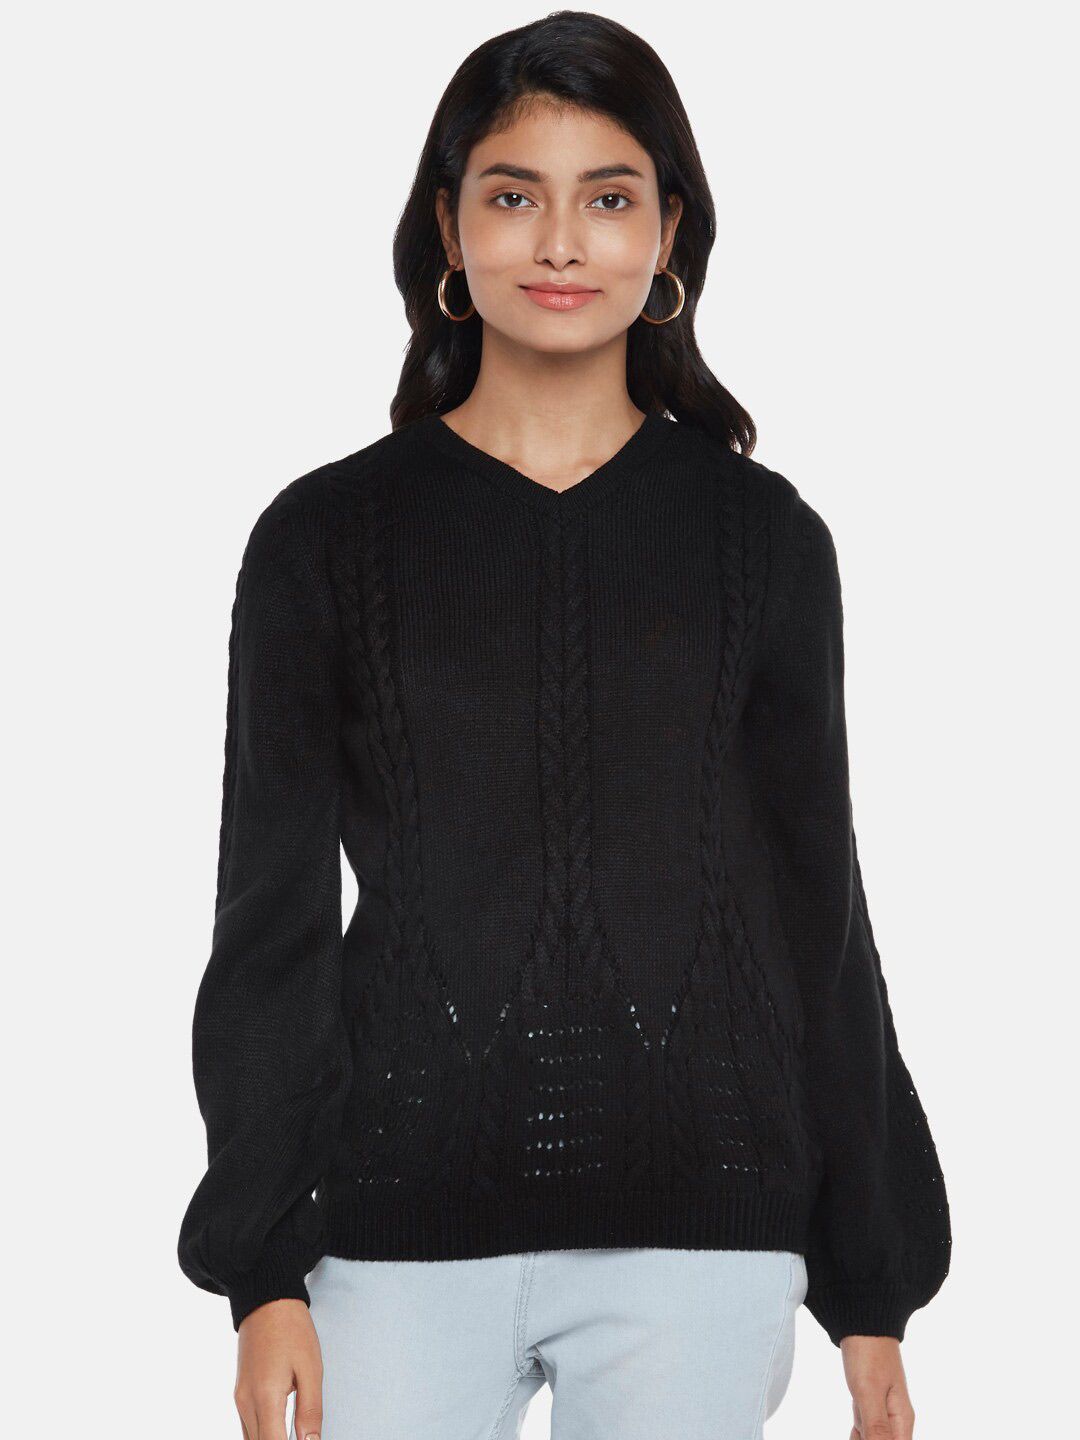 Honey by Pantaloons Women Black & french middle Pullover Price in India